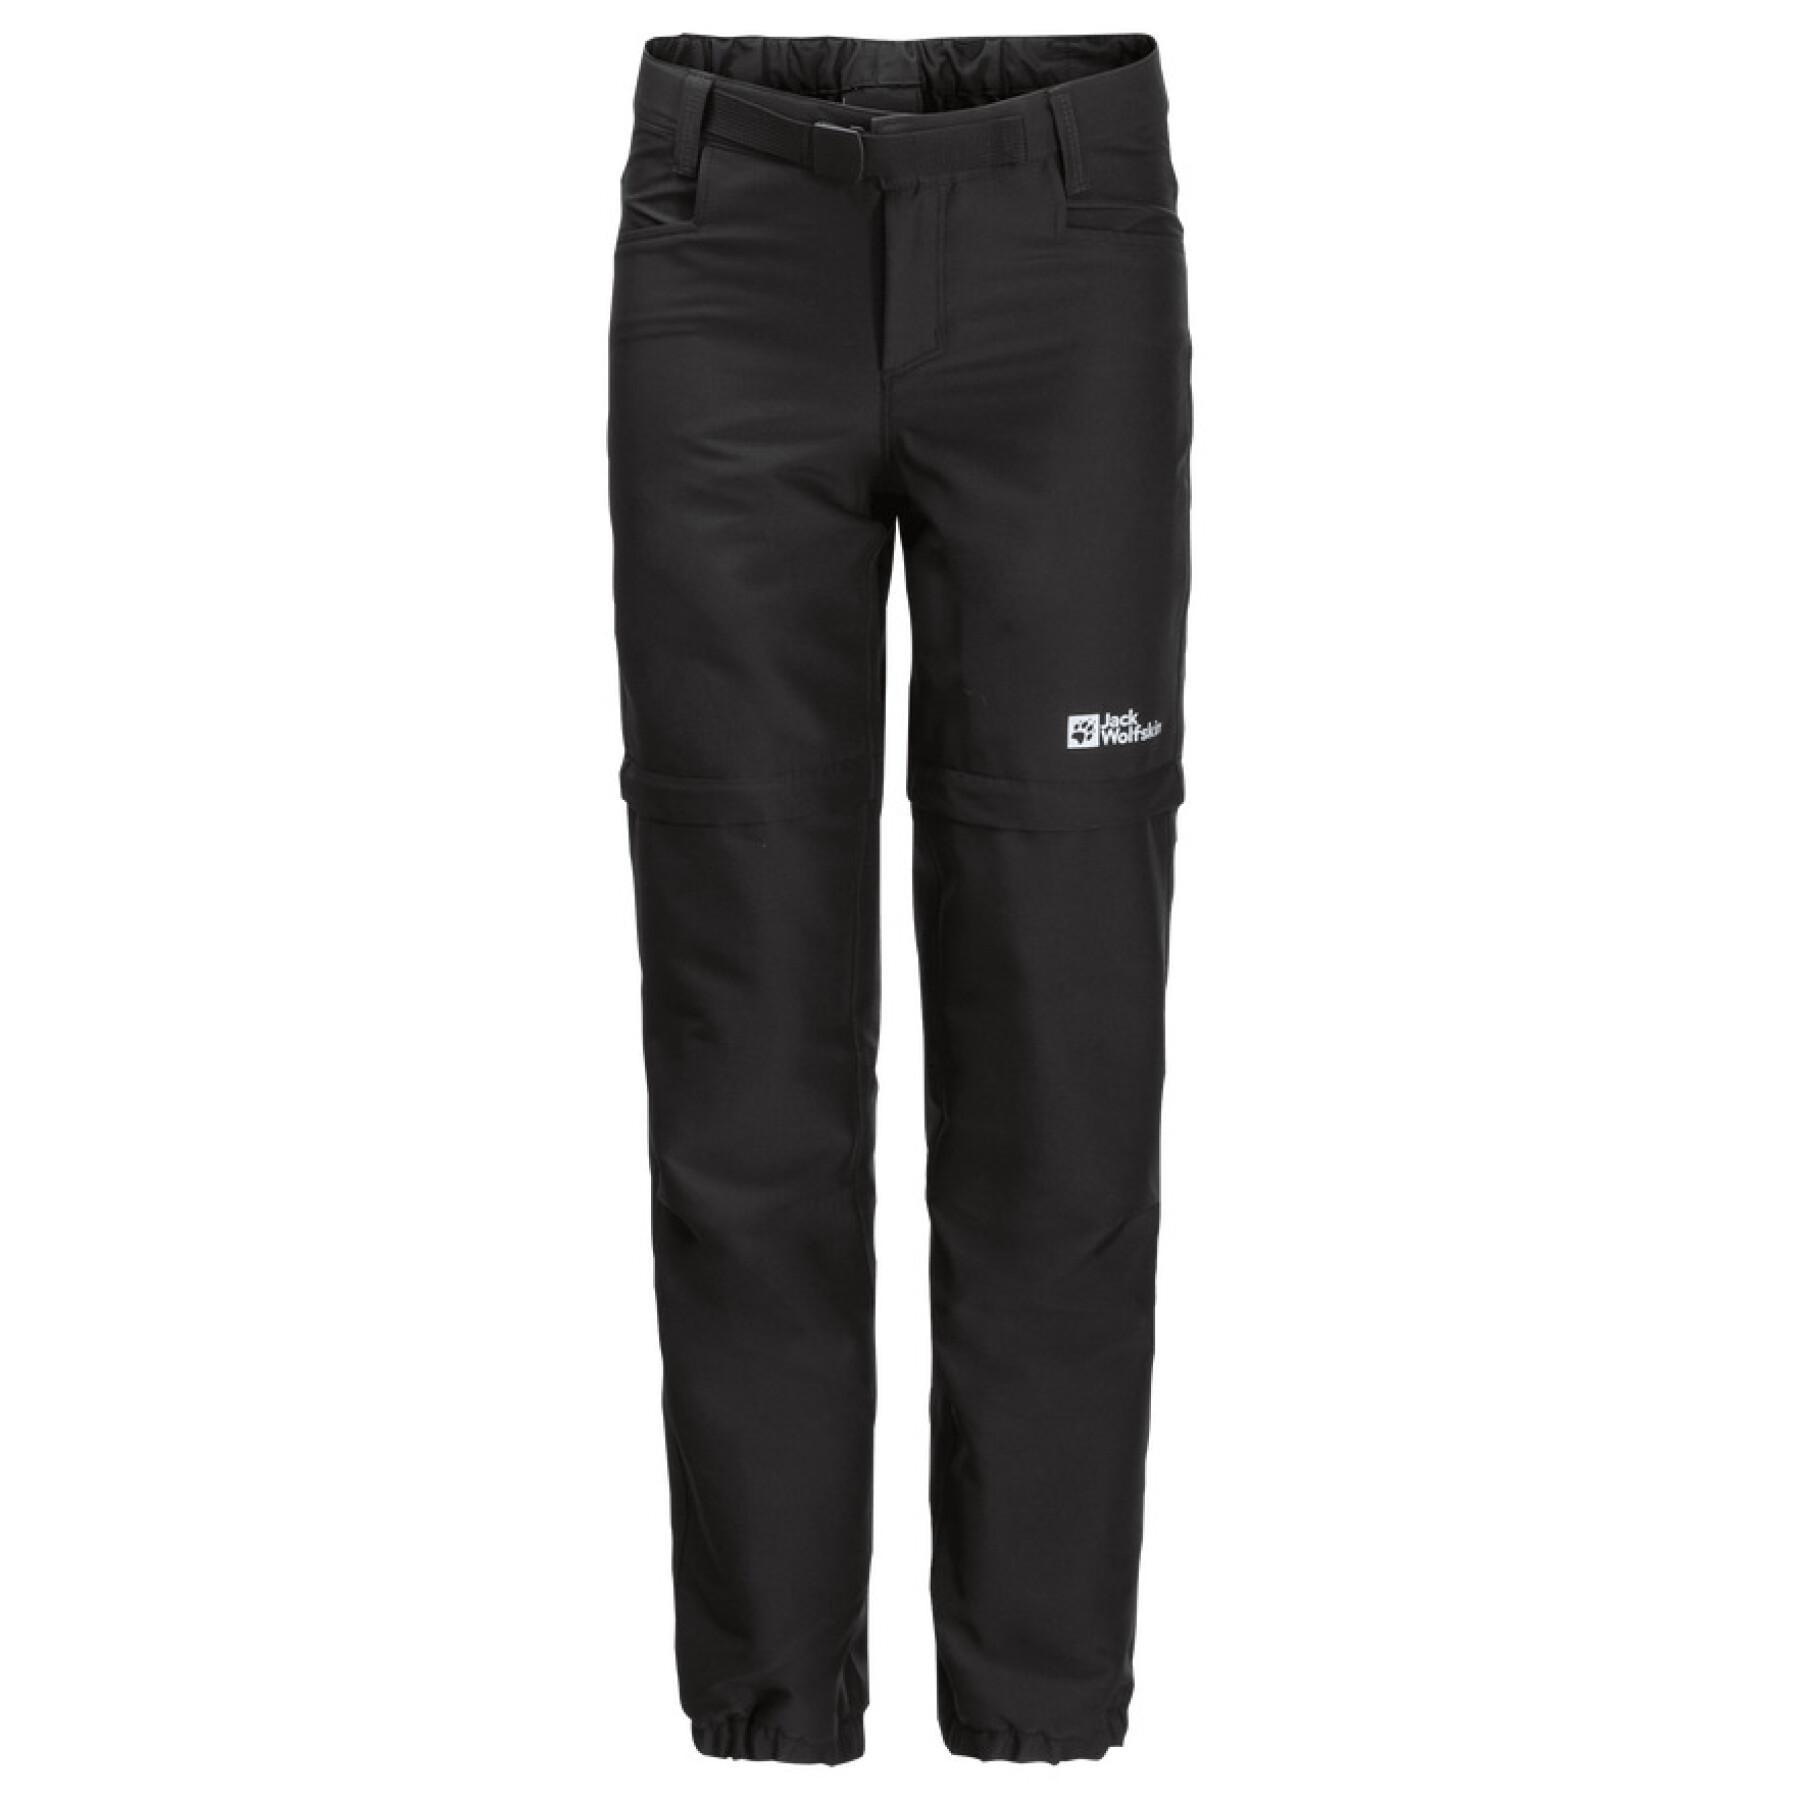 Zipped hiking pants for kids Jack Wolfskin Active